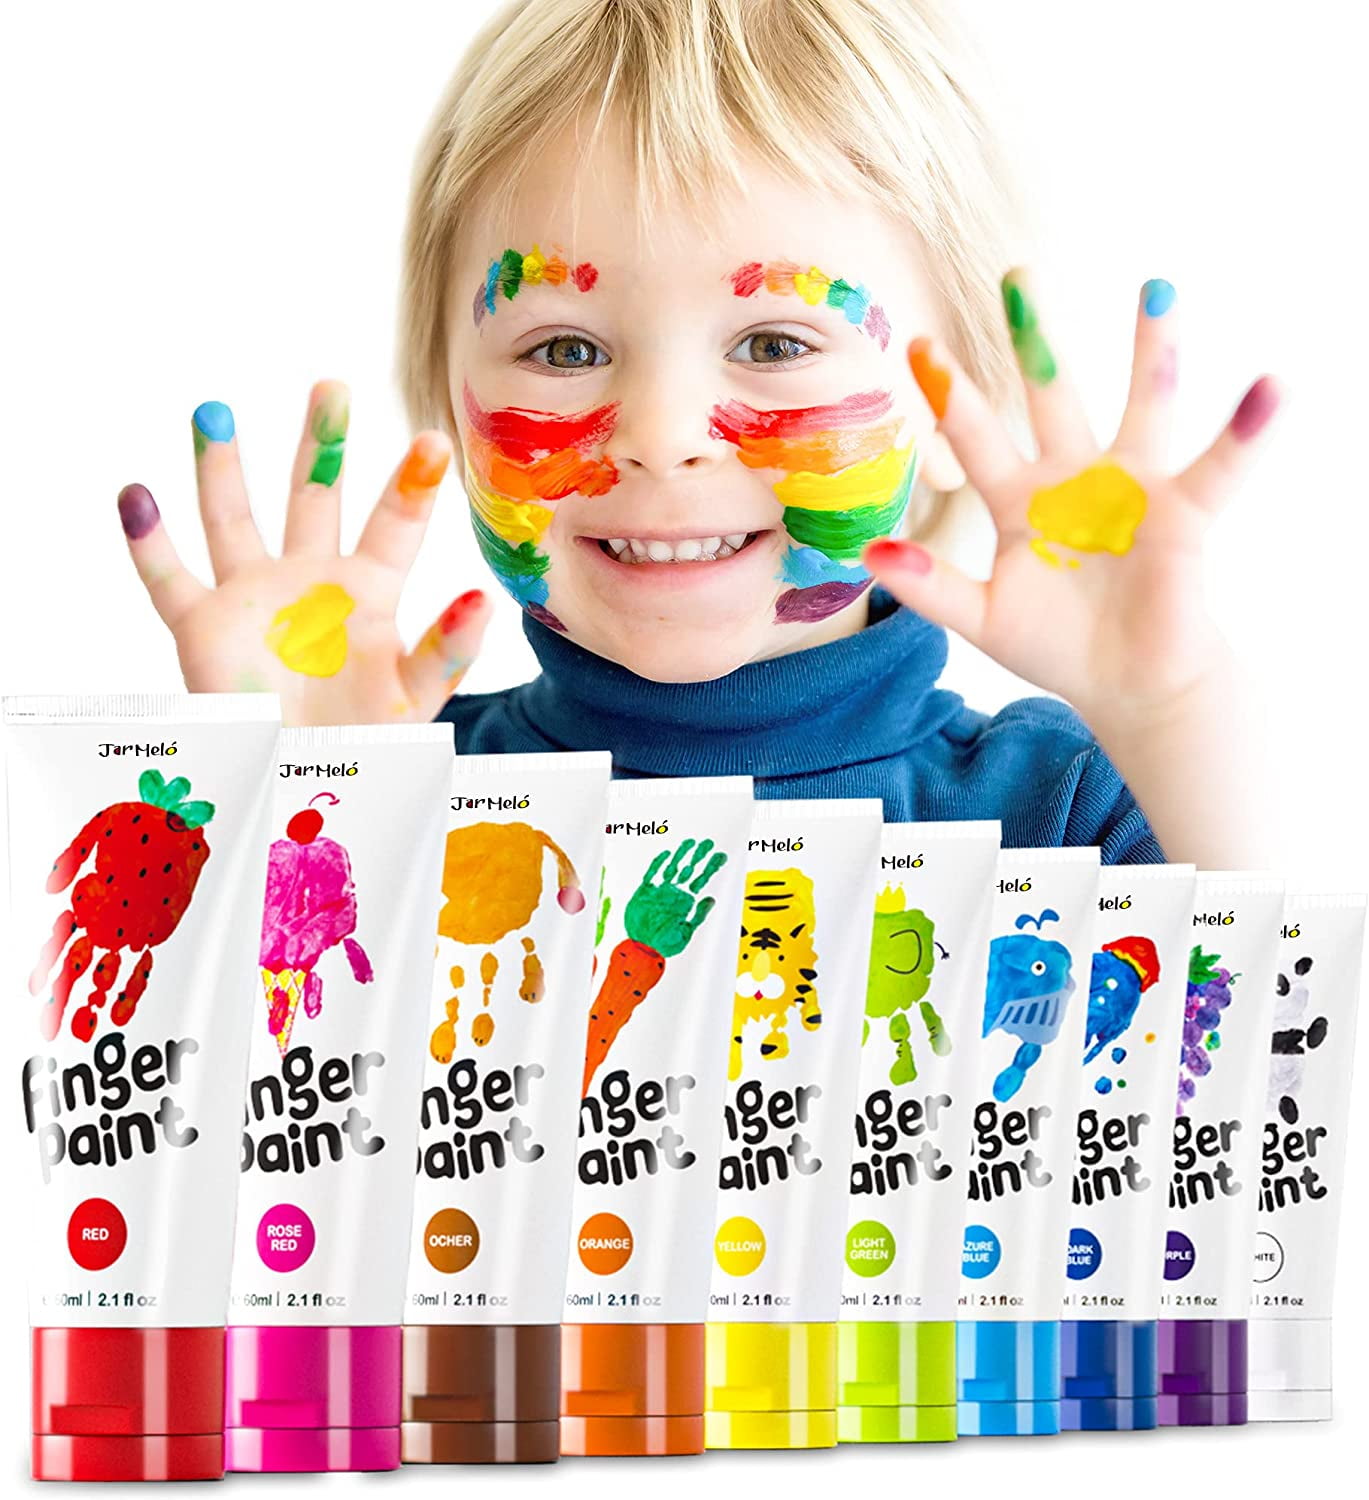 Jar Melo 10 Colors Finger Paint for Toddlers,Washable,Non Toxic